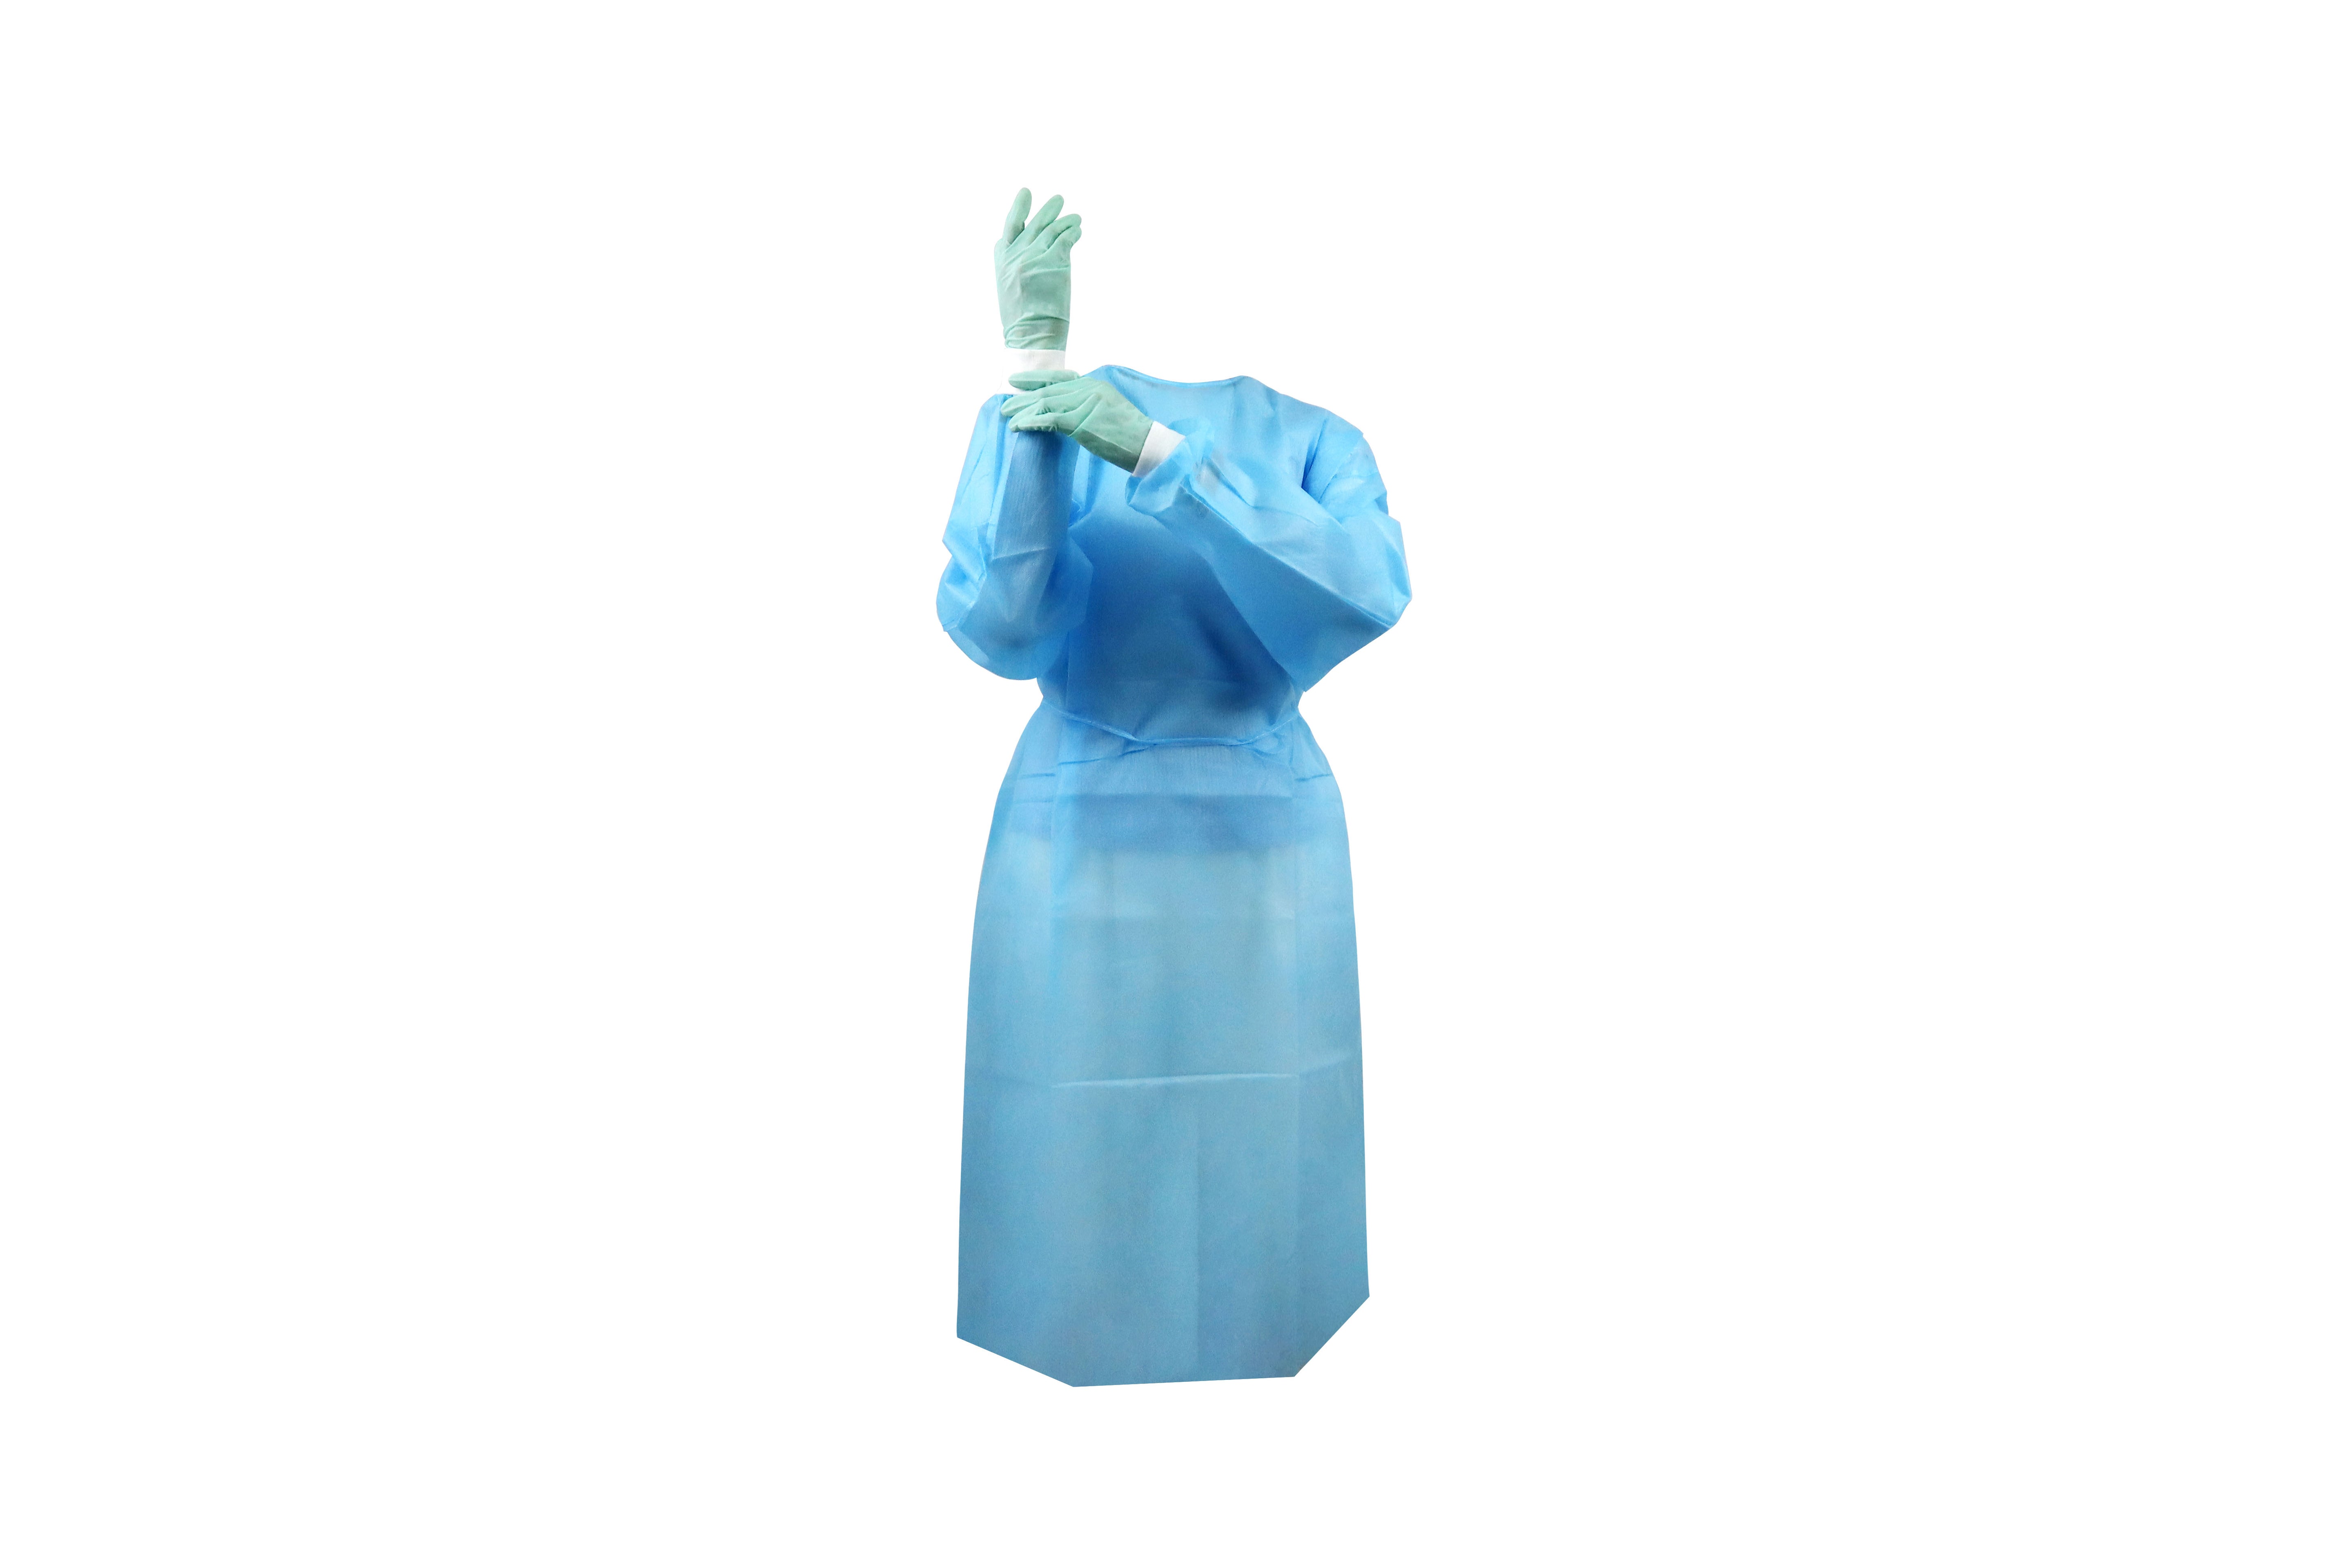 Isolation Gown, Nylon Knitted Cuffs,30g PP, 5 Bags / Case.